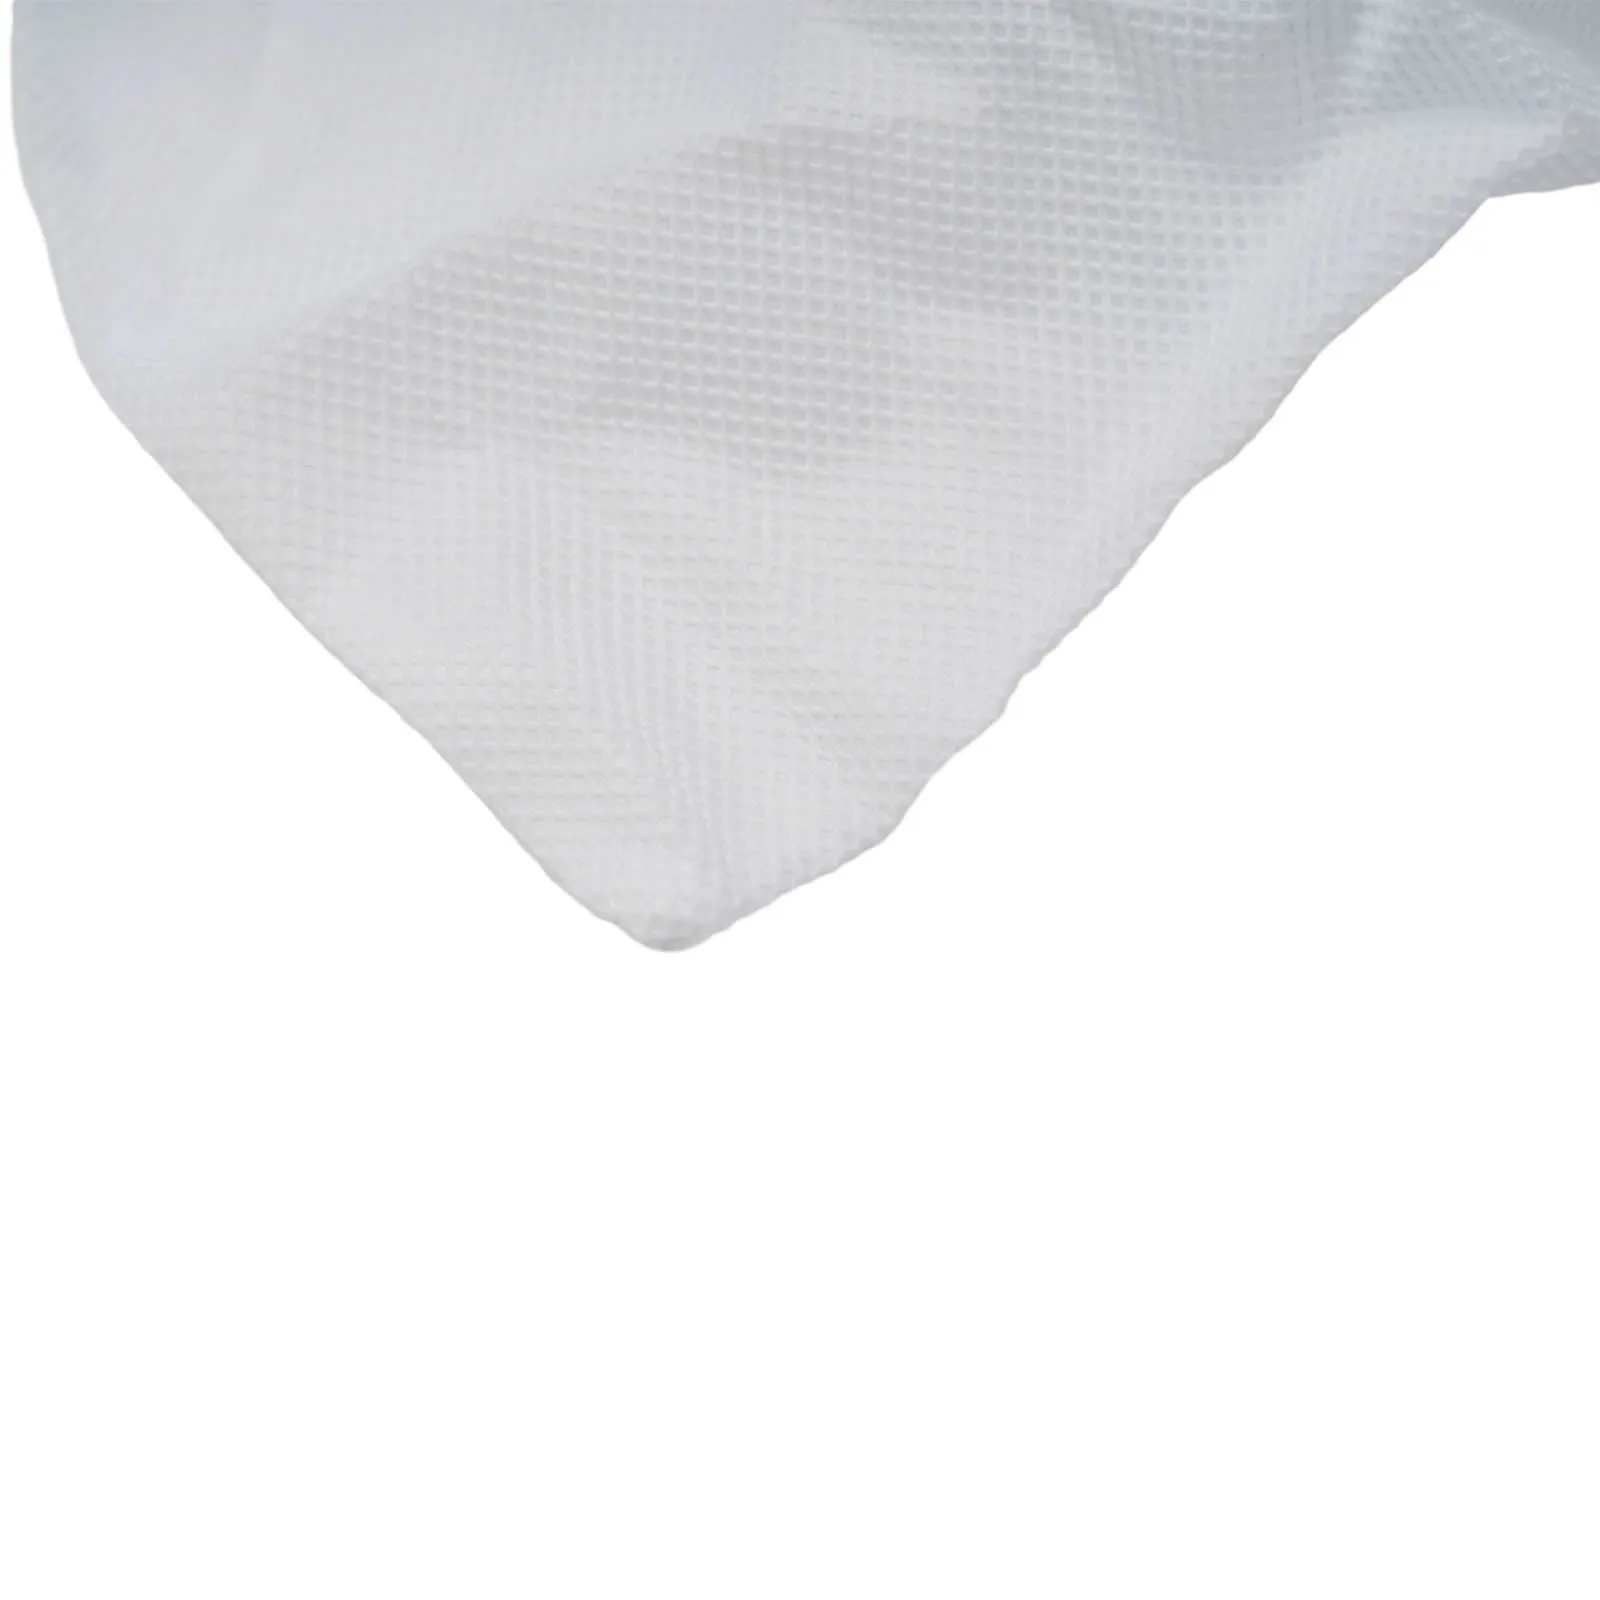 More Durable Practical Washable Brand New Washable Dust Bag Dust Bags 166084-9 For Makita CL100/106/180 DCL180 pre filter filter filter parts for cl100 106 180 dcl180 for makita reusable vacuum cleaner 443060 3